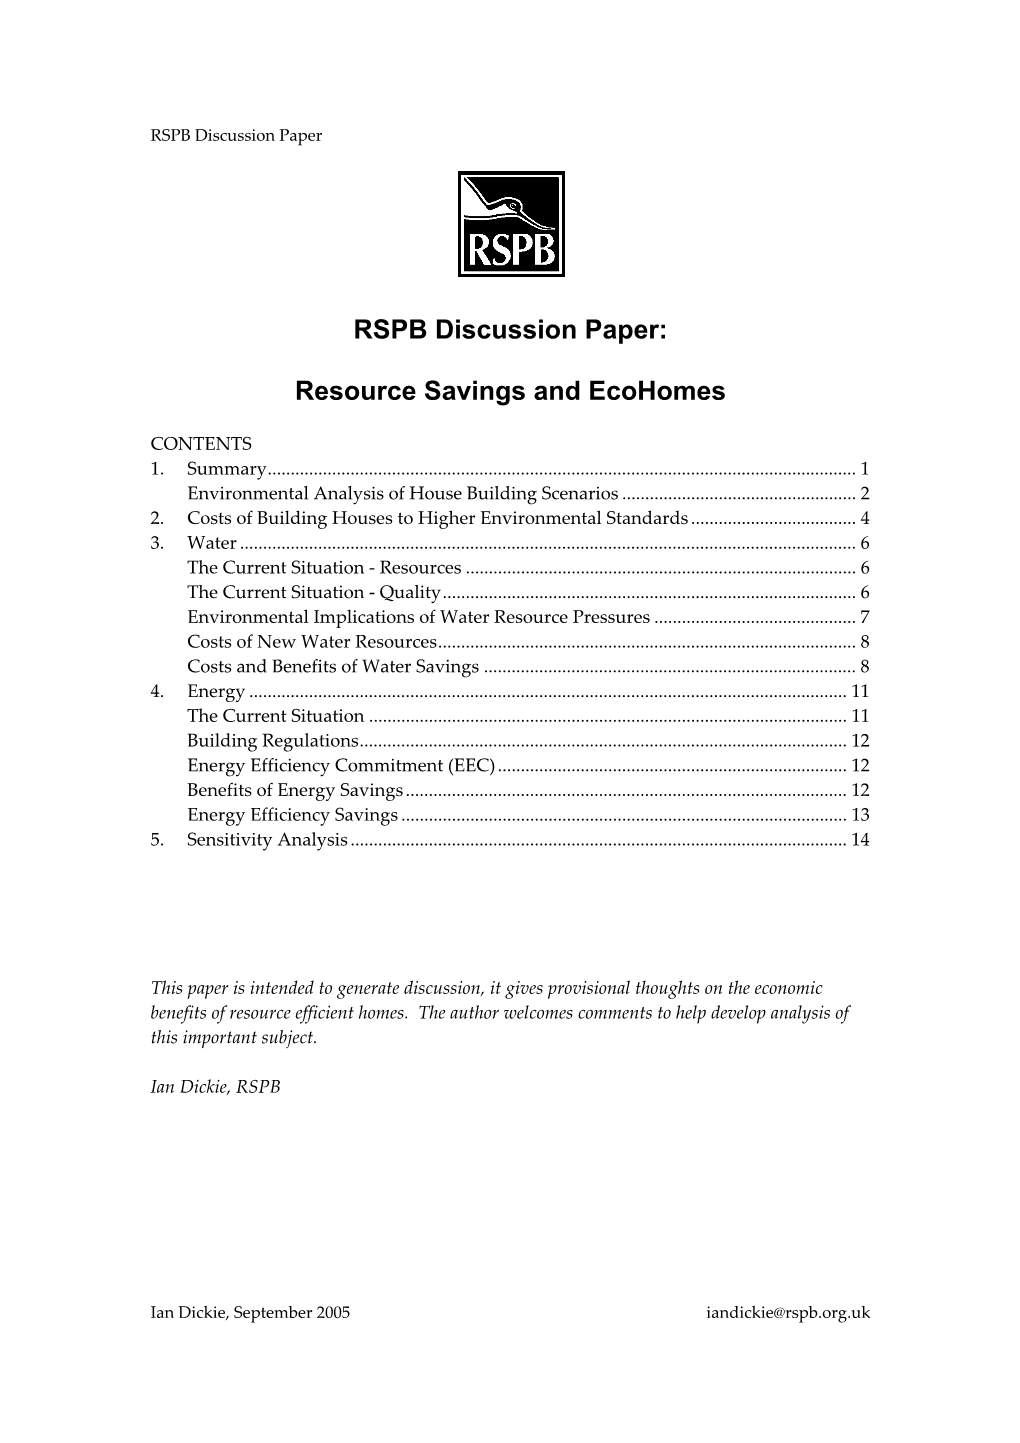 RSPB Discussion Paper: Resource Savings and Ecohomes